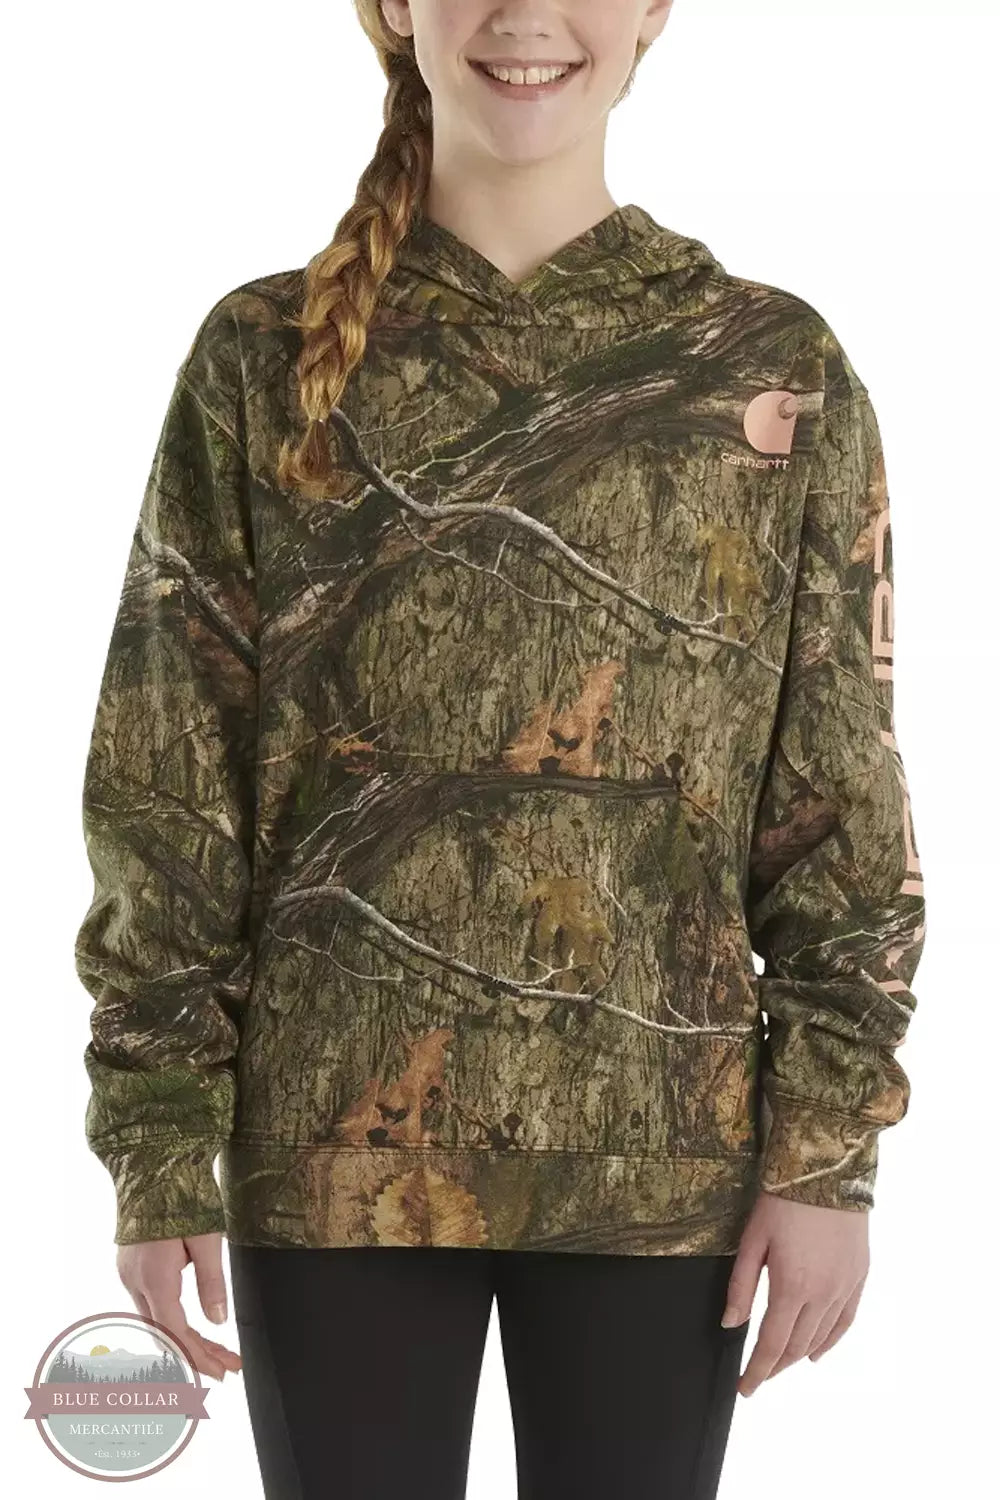 Carhartt CA9984-CR27 Youth Long Sleeve Camo Hoodie Front View